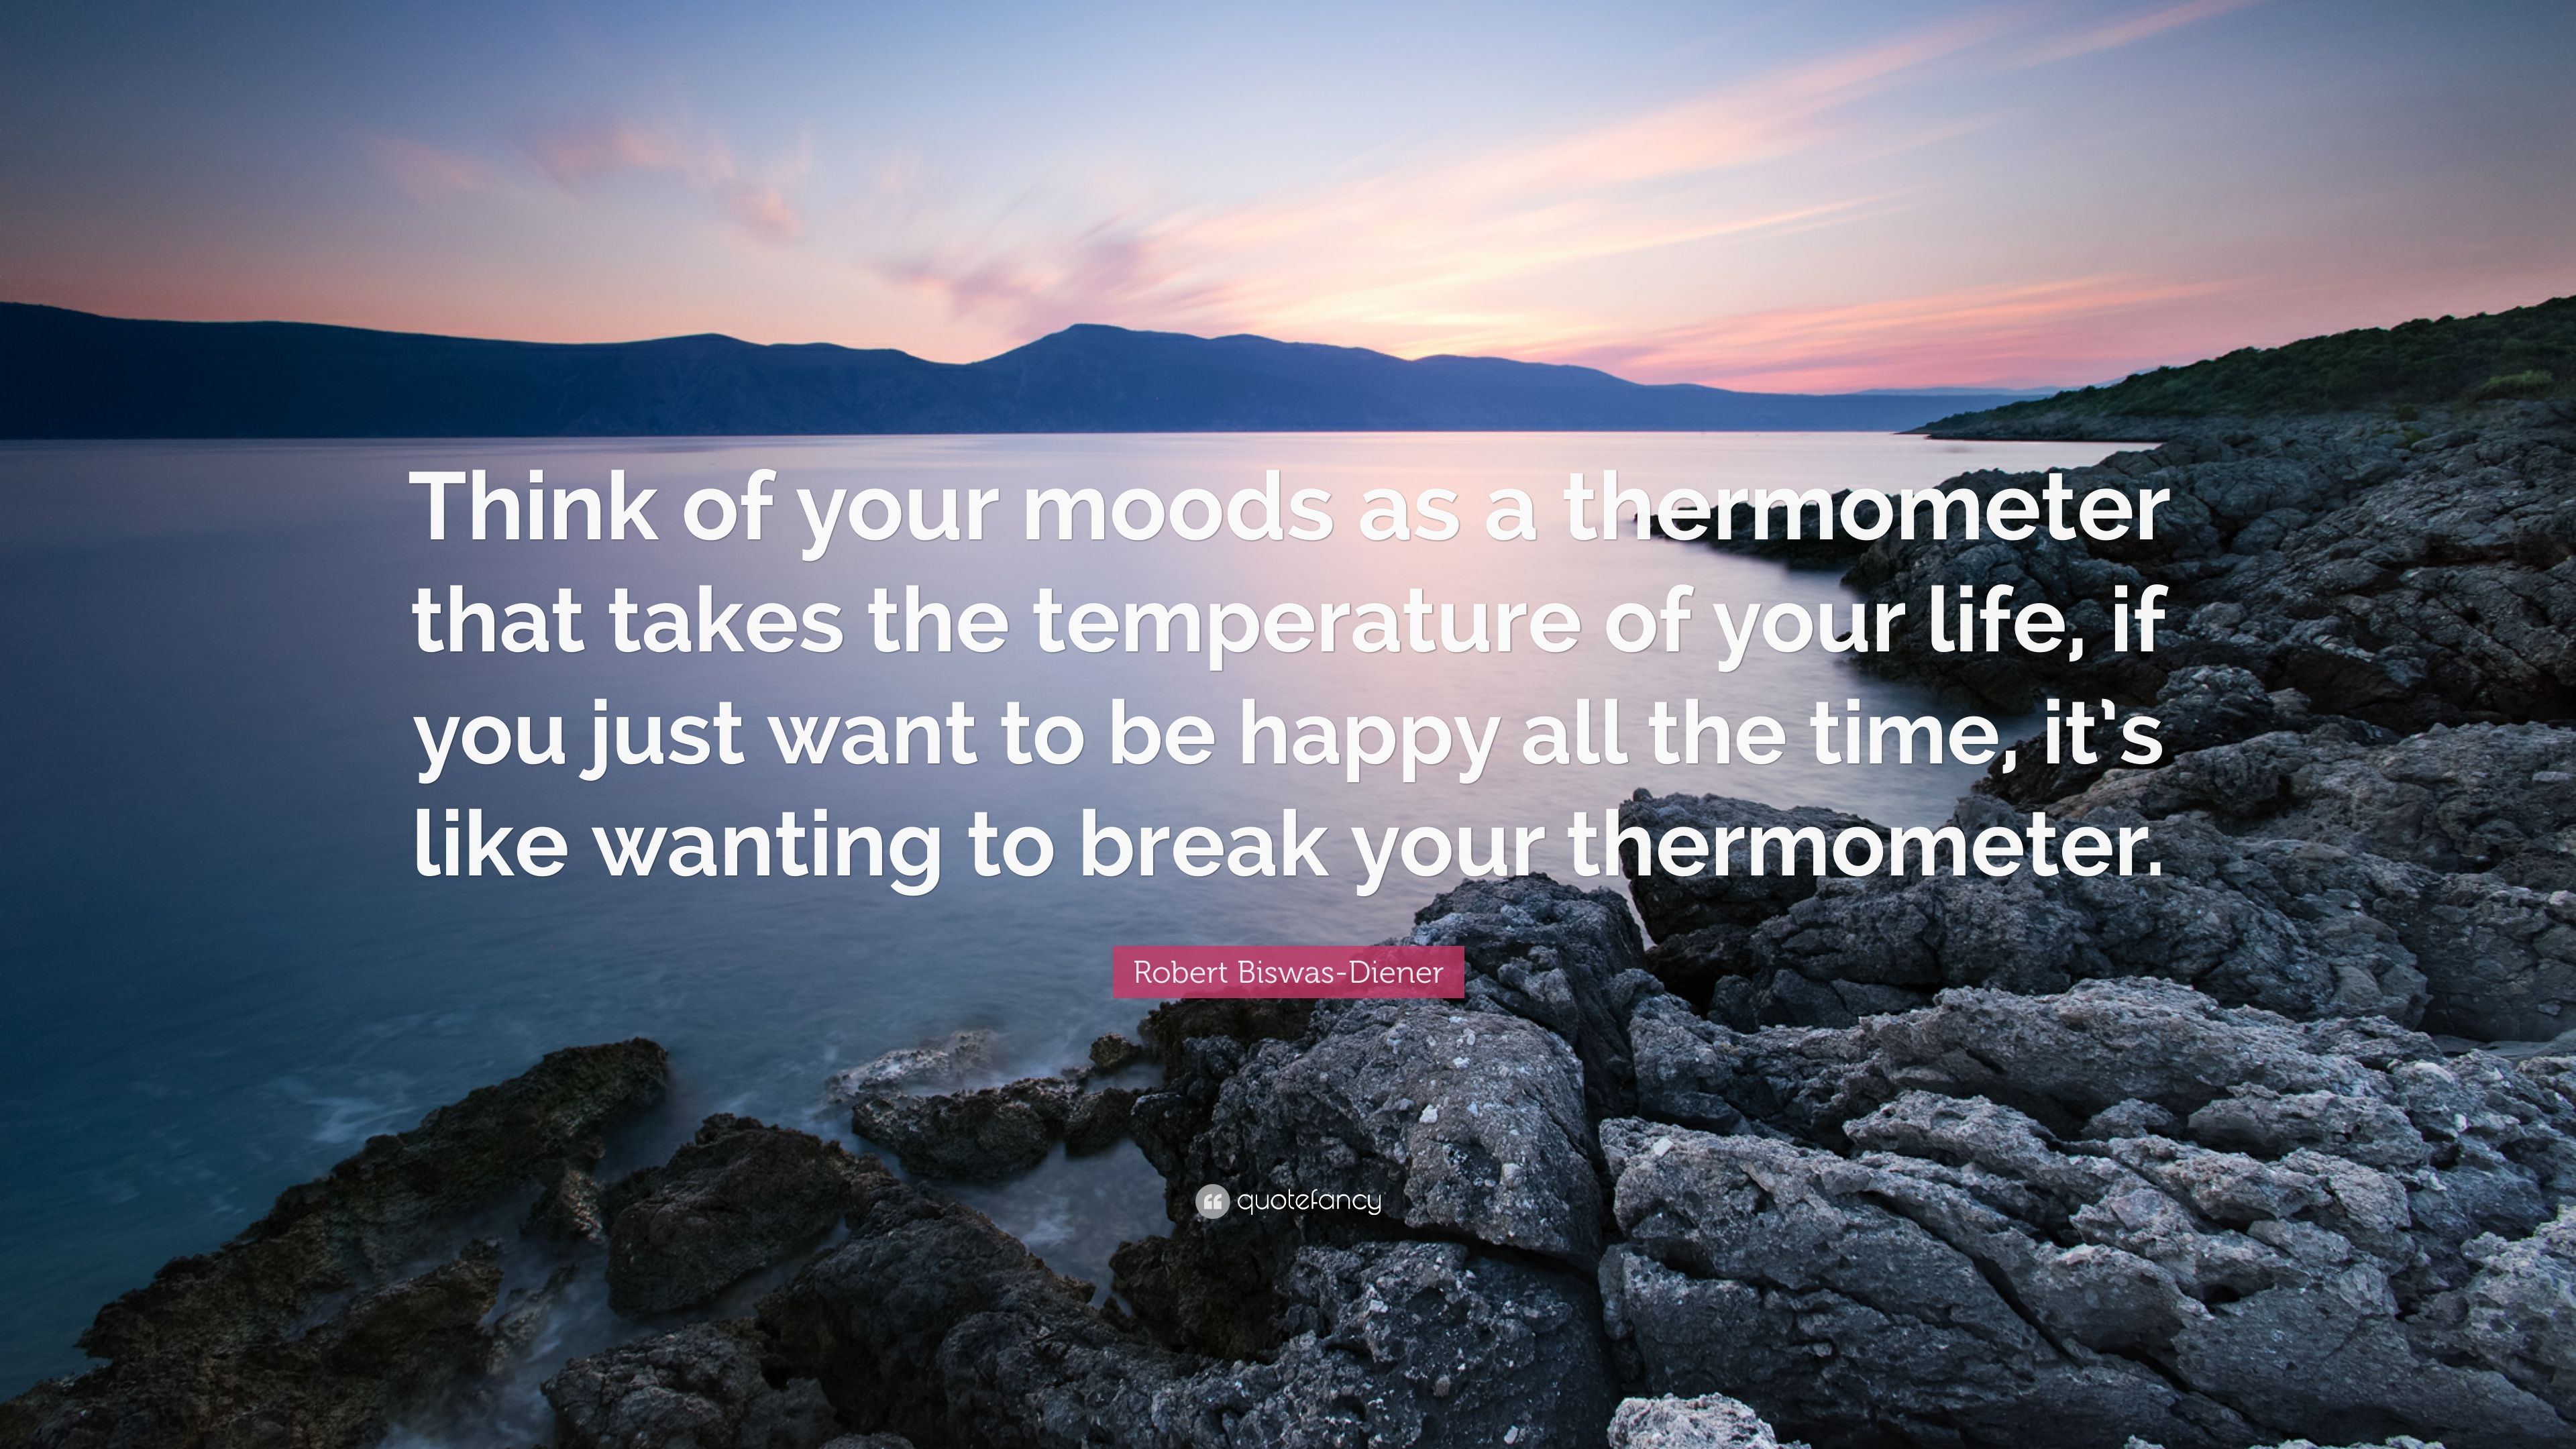 Robert Biswas Diener Quote: “Think Of Your Moods As A Thermometer